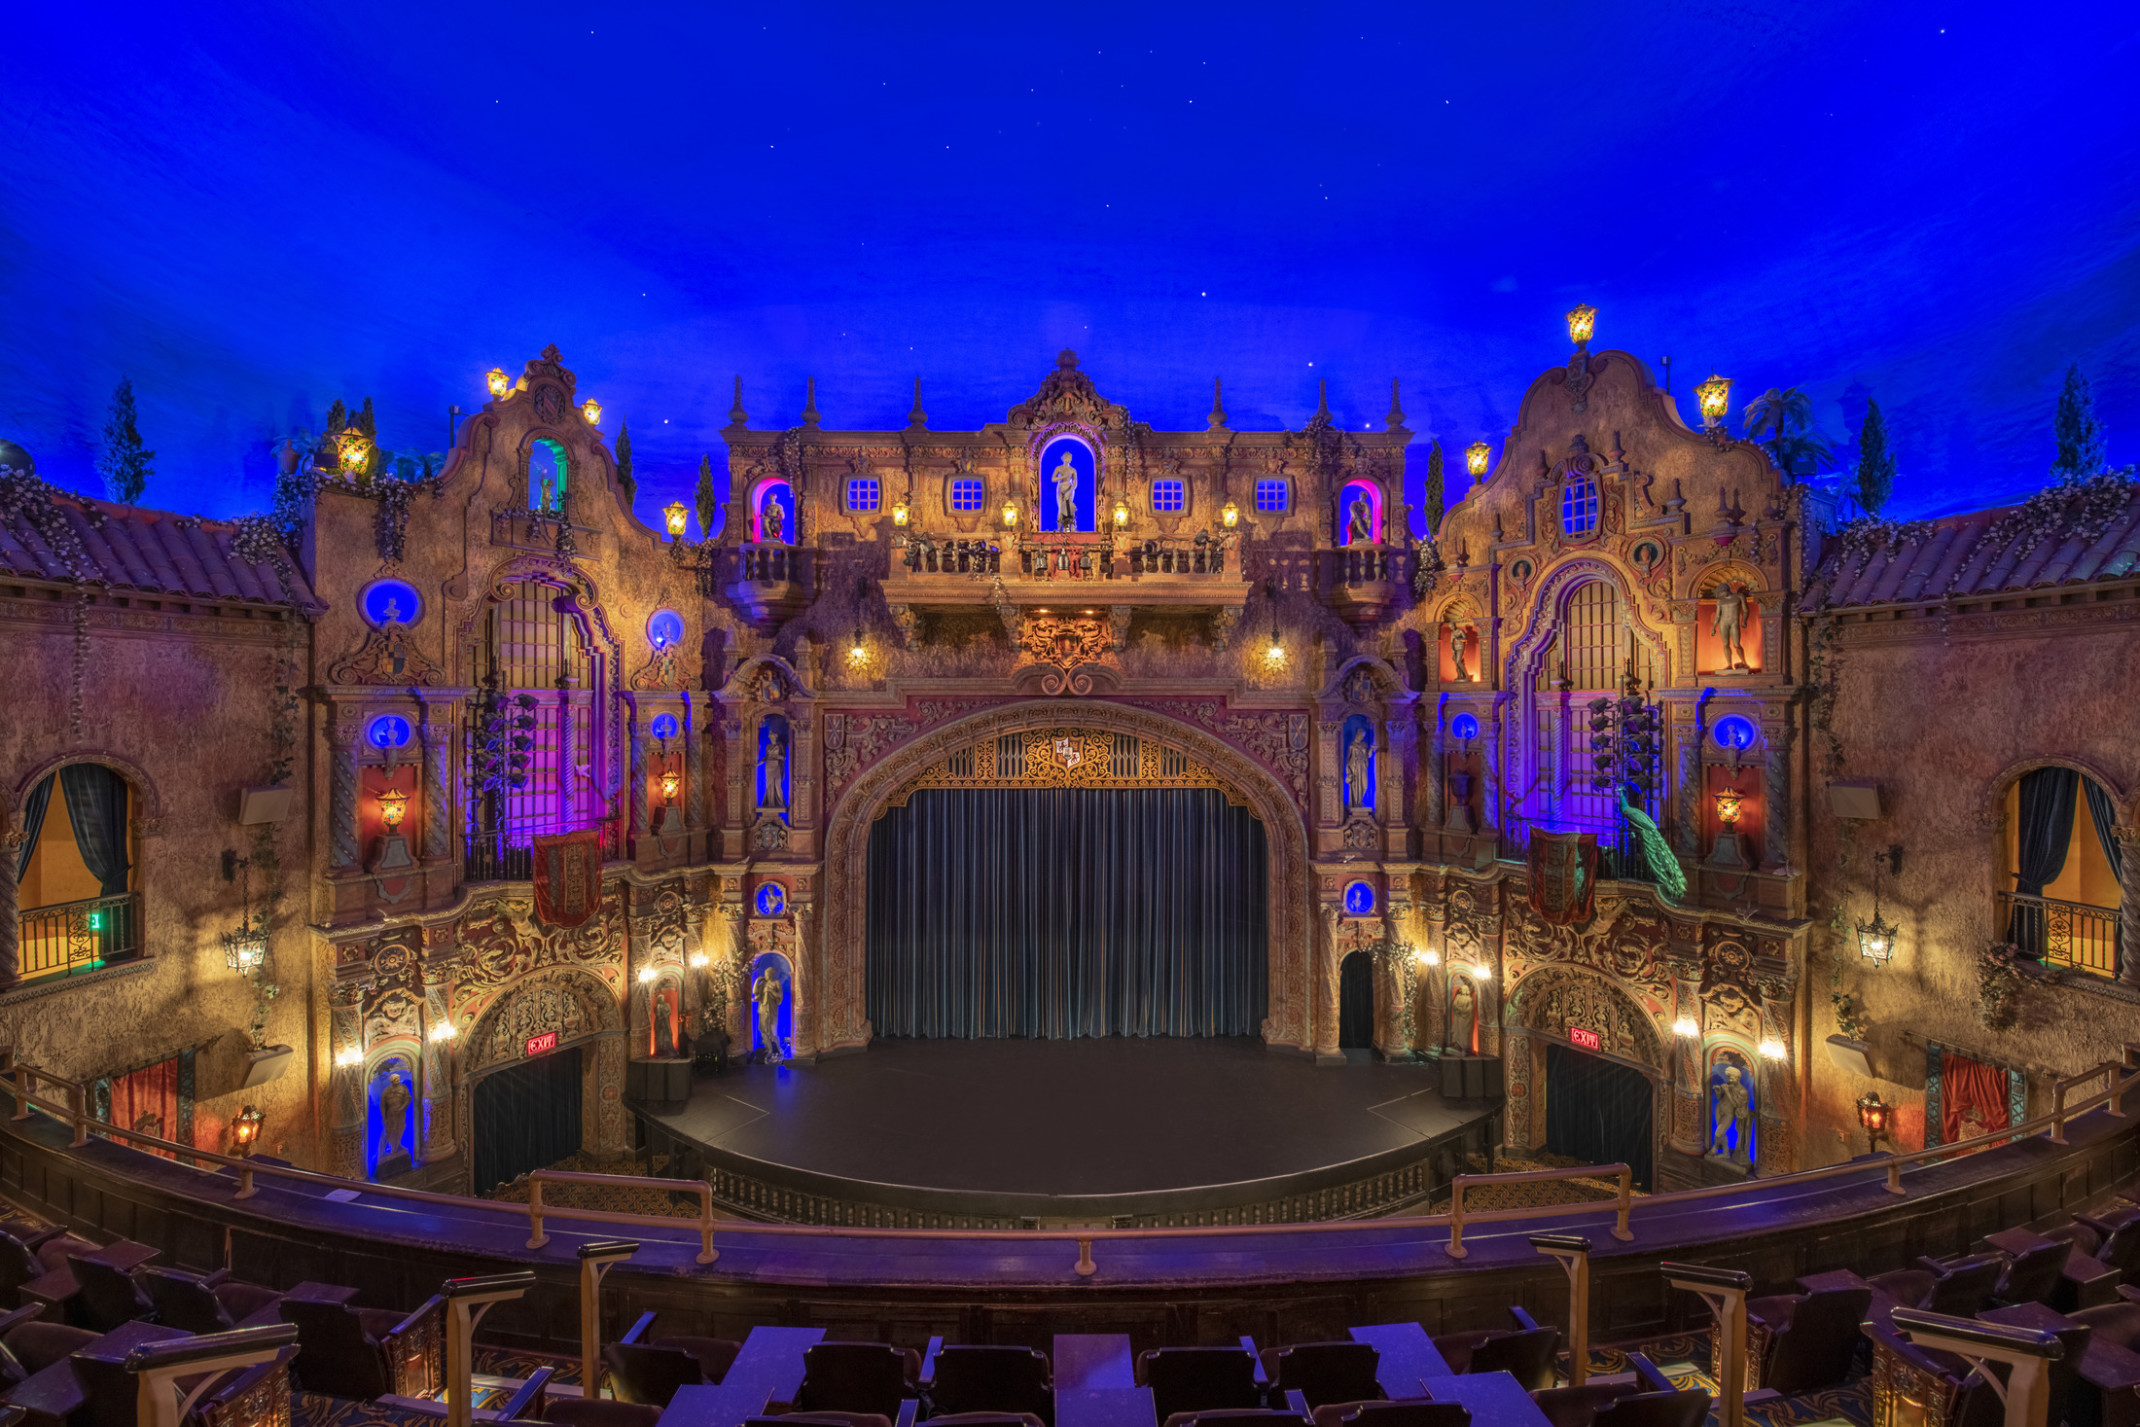 Historic Tampa Theater renovated with ornate carved proscenium with blue and orange illuminated niches with high relief sculptures